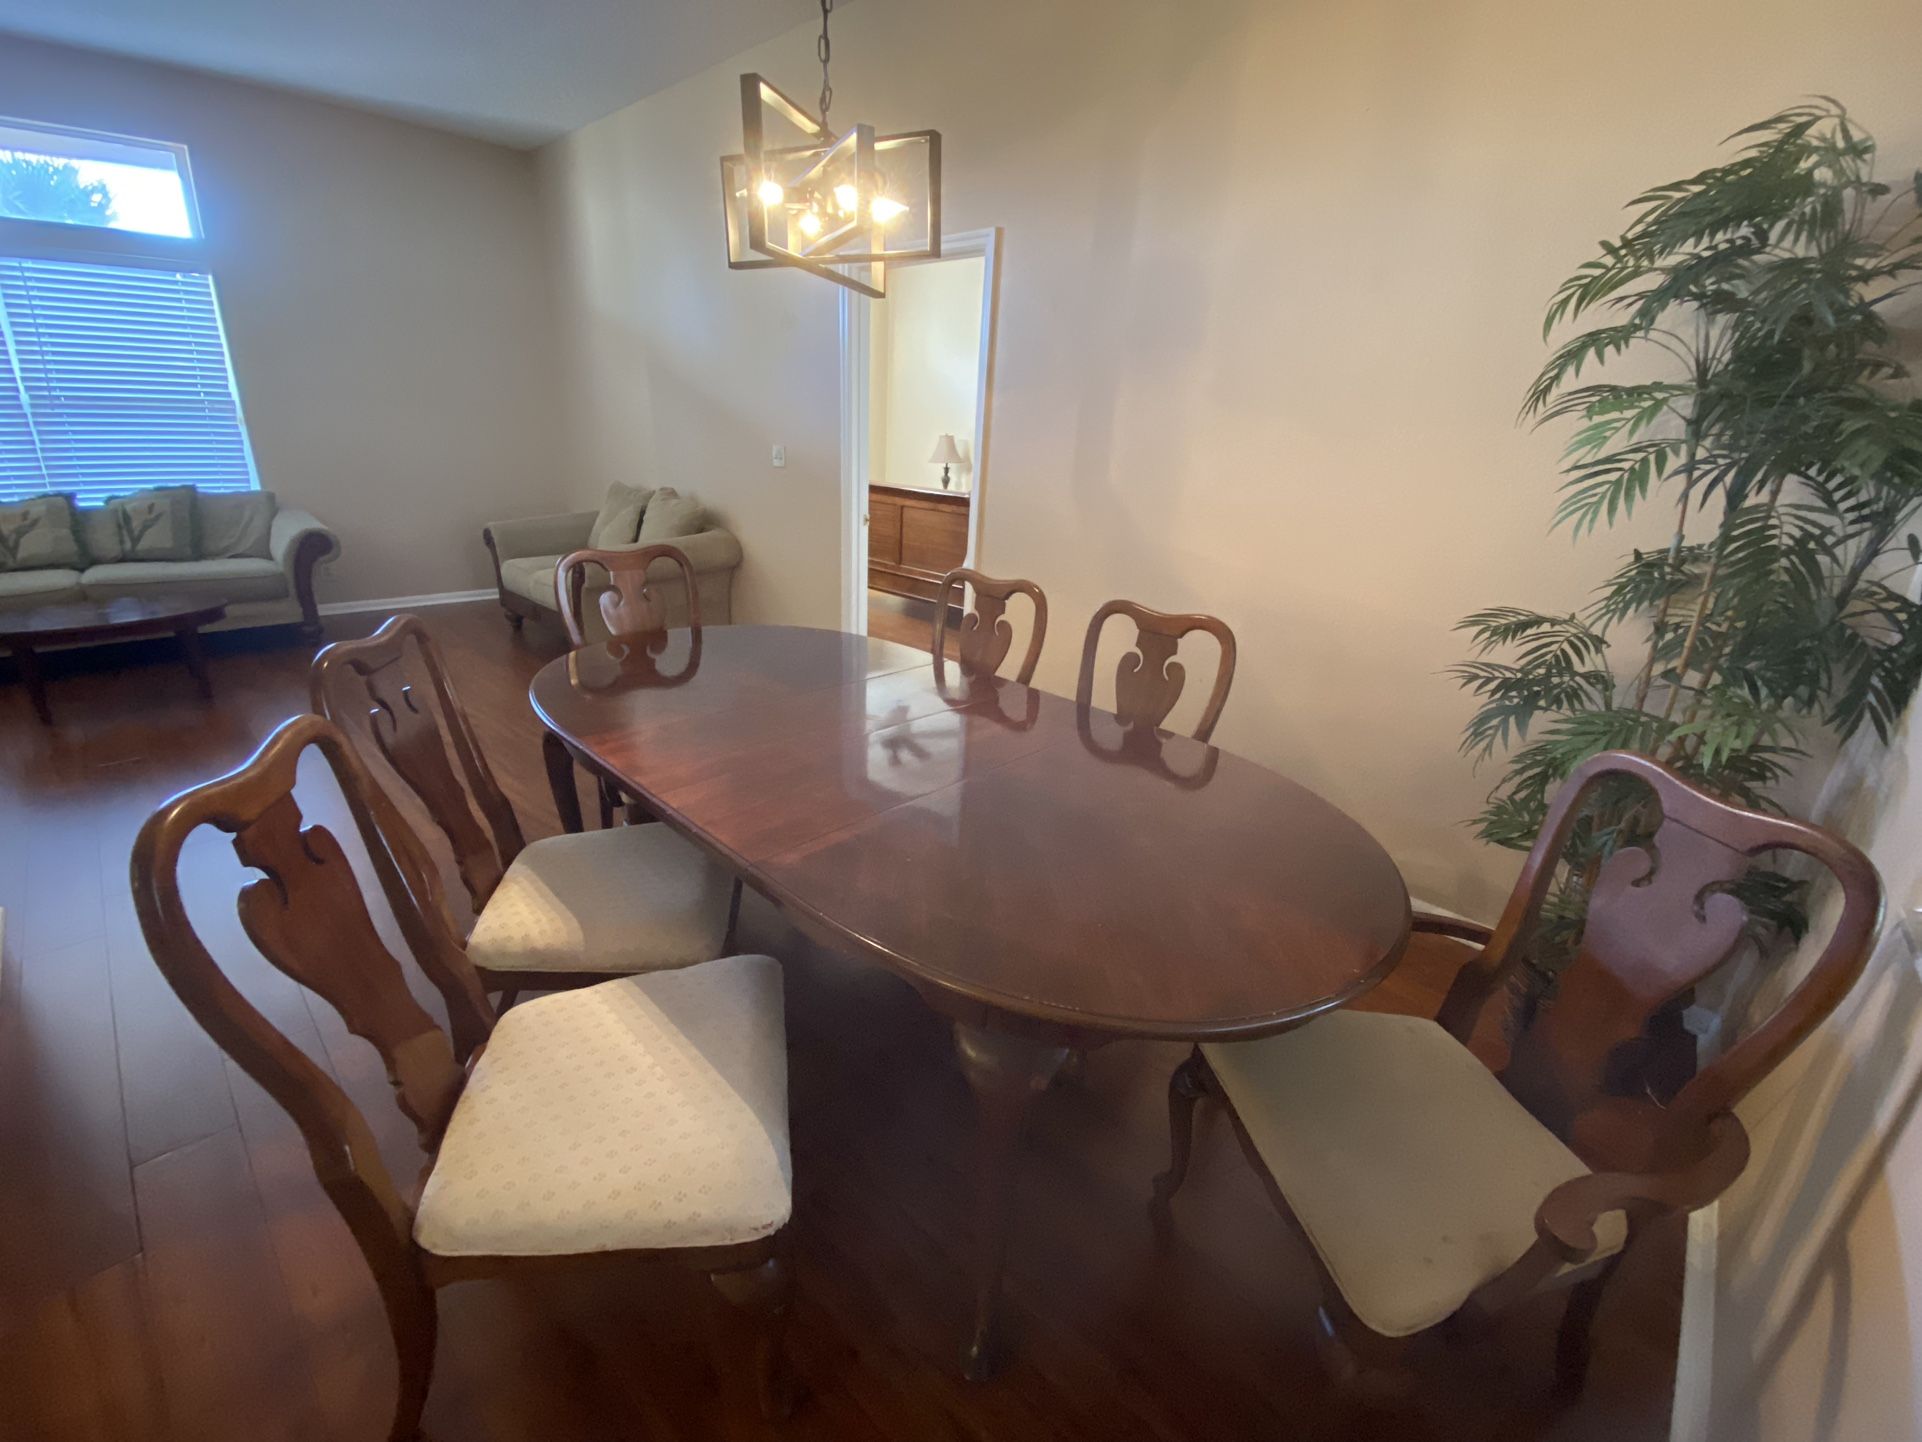 Dining Table & Chairs, Sofas, Bedroom Sets